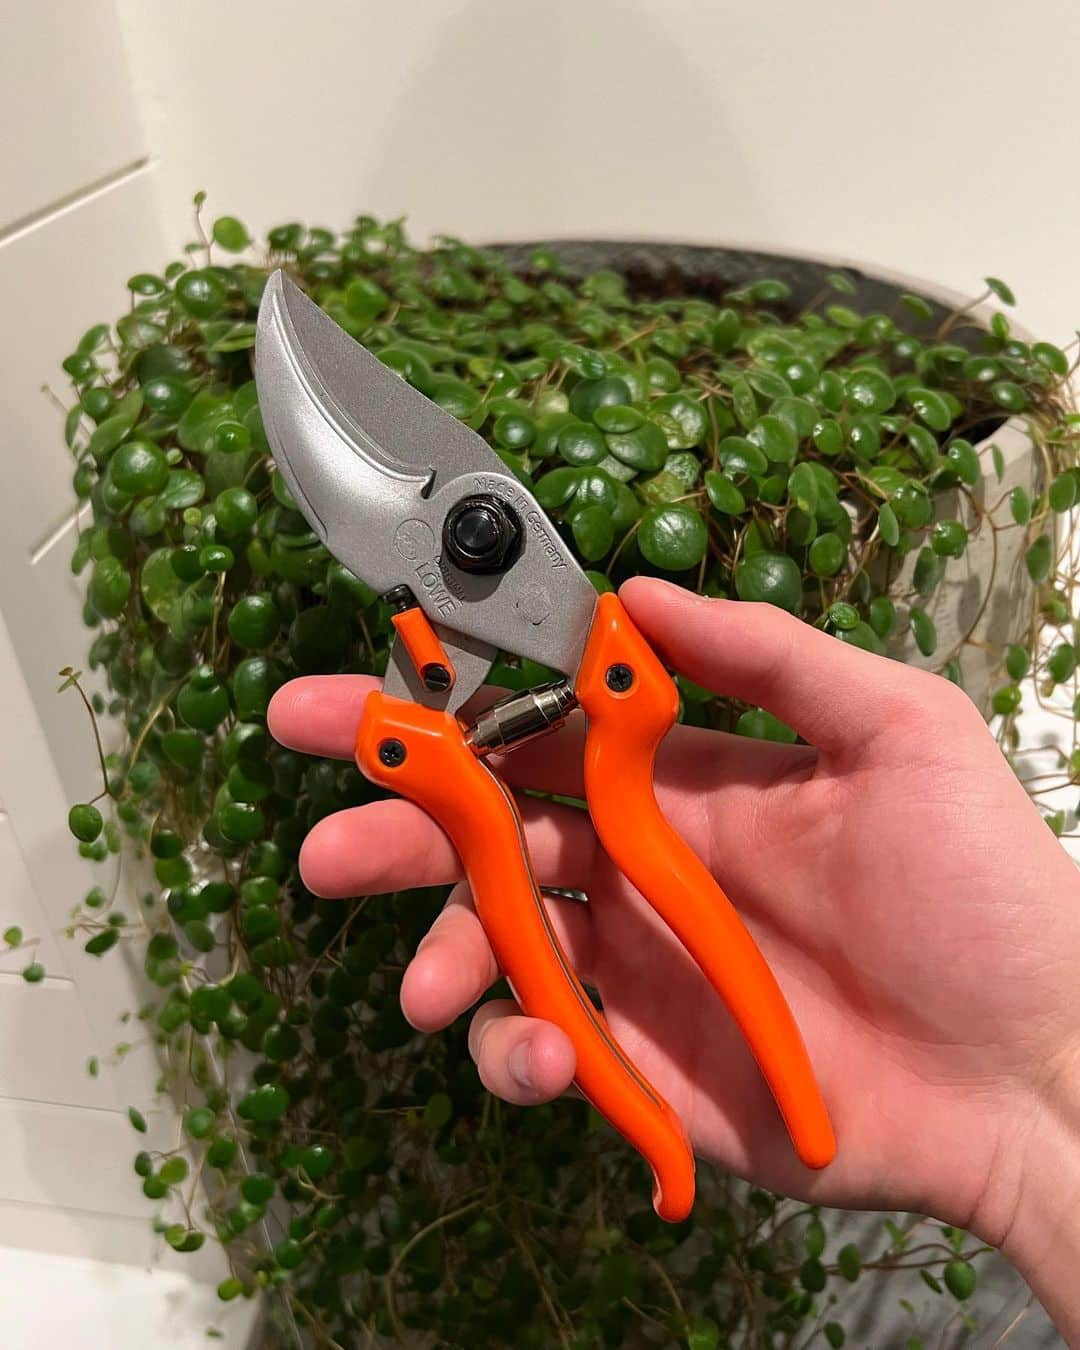 Top Succulent Care Tools: Clippers, Tweezers, and More